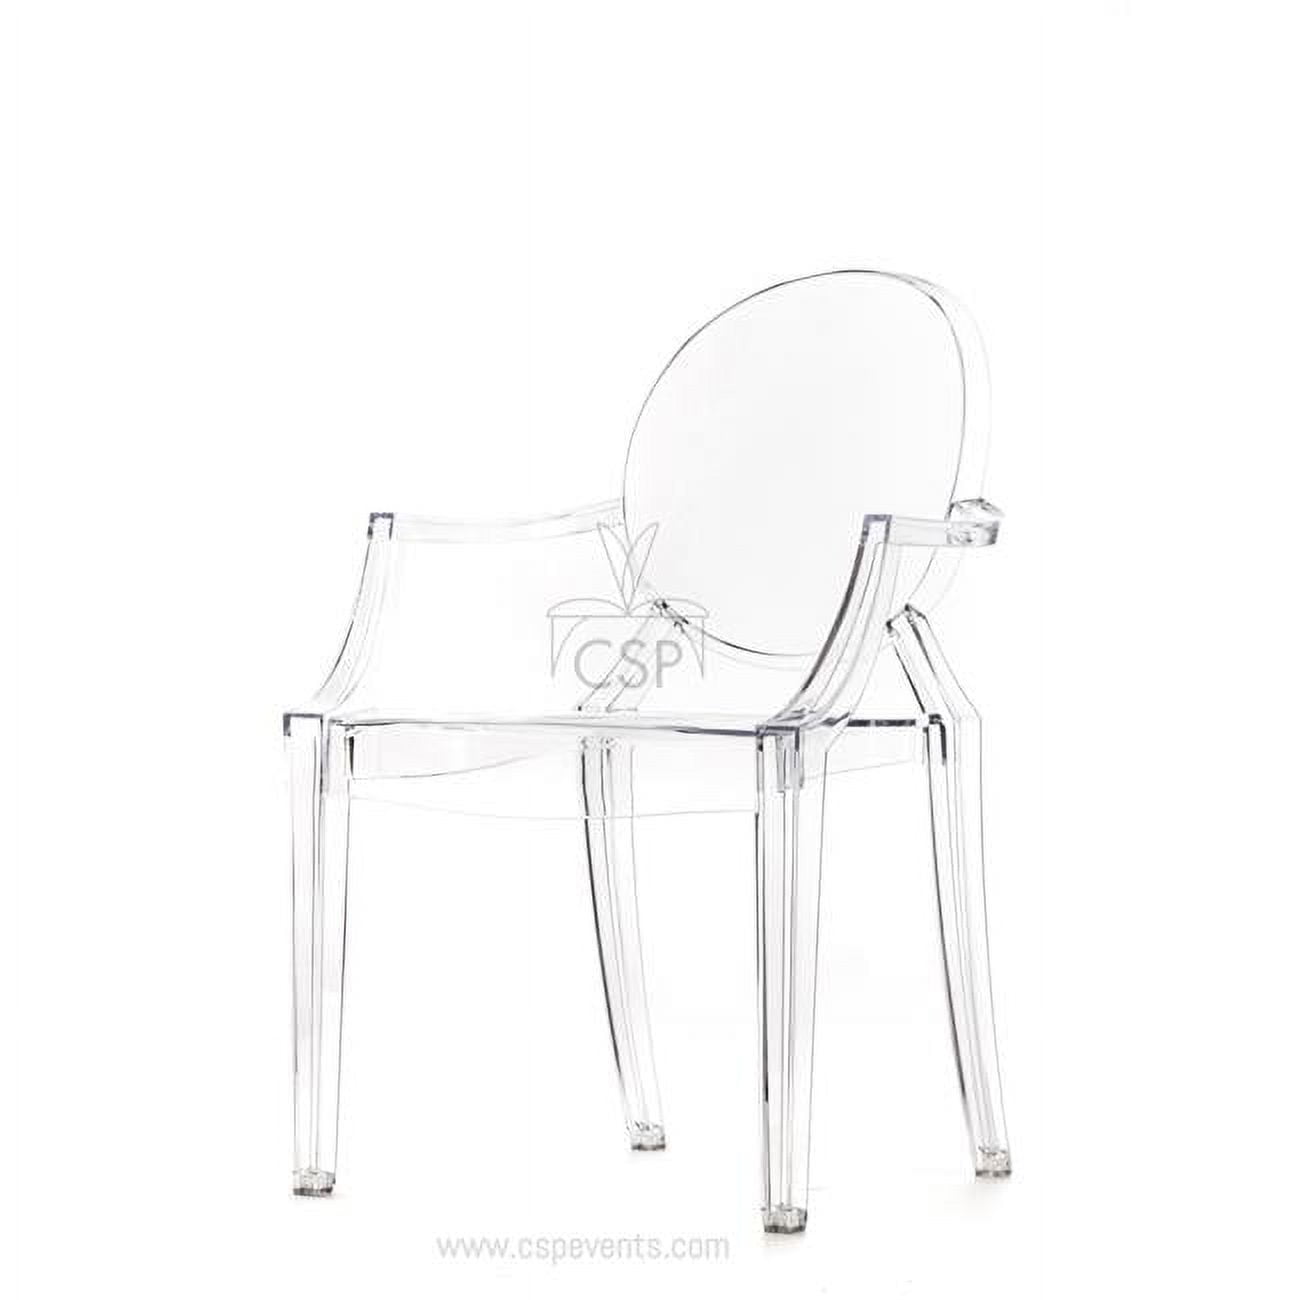 Rpc-kage-arm-cl-4 Clear Polycarbonate Kage Chair With Arms - 36 In. - Set Of 4